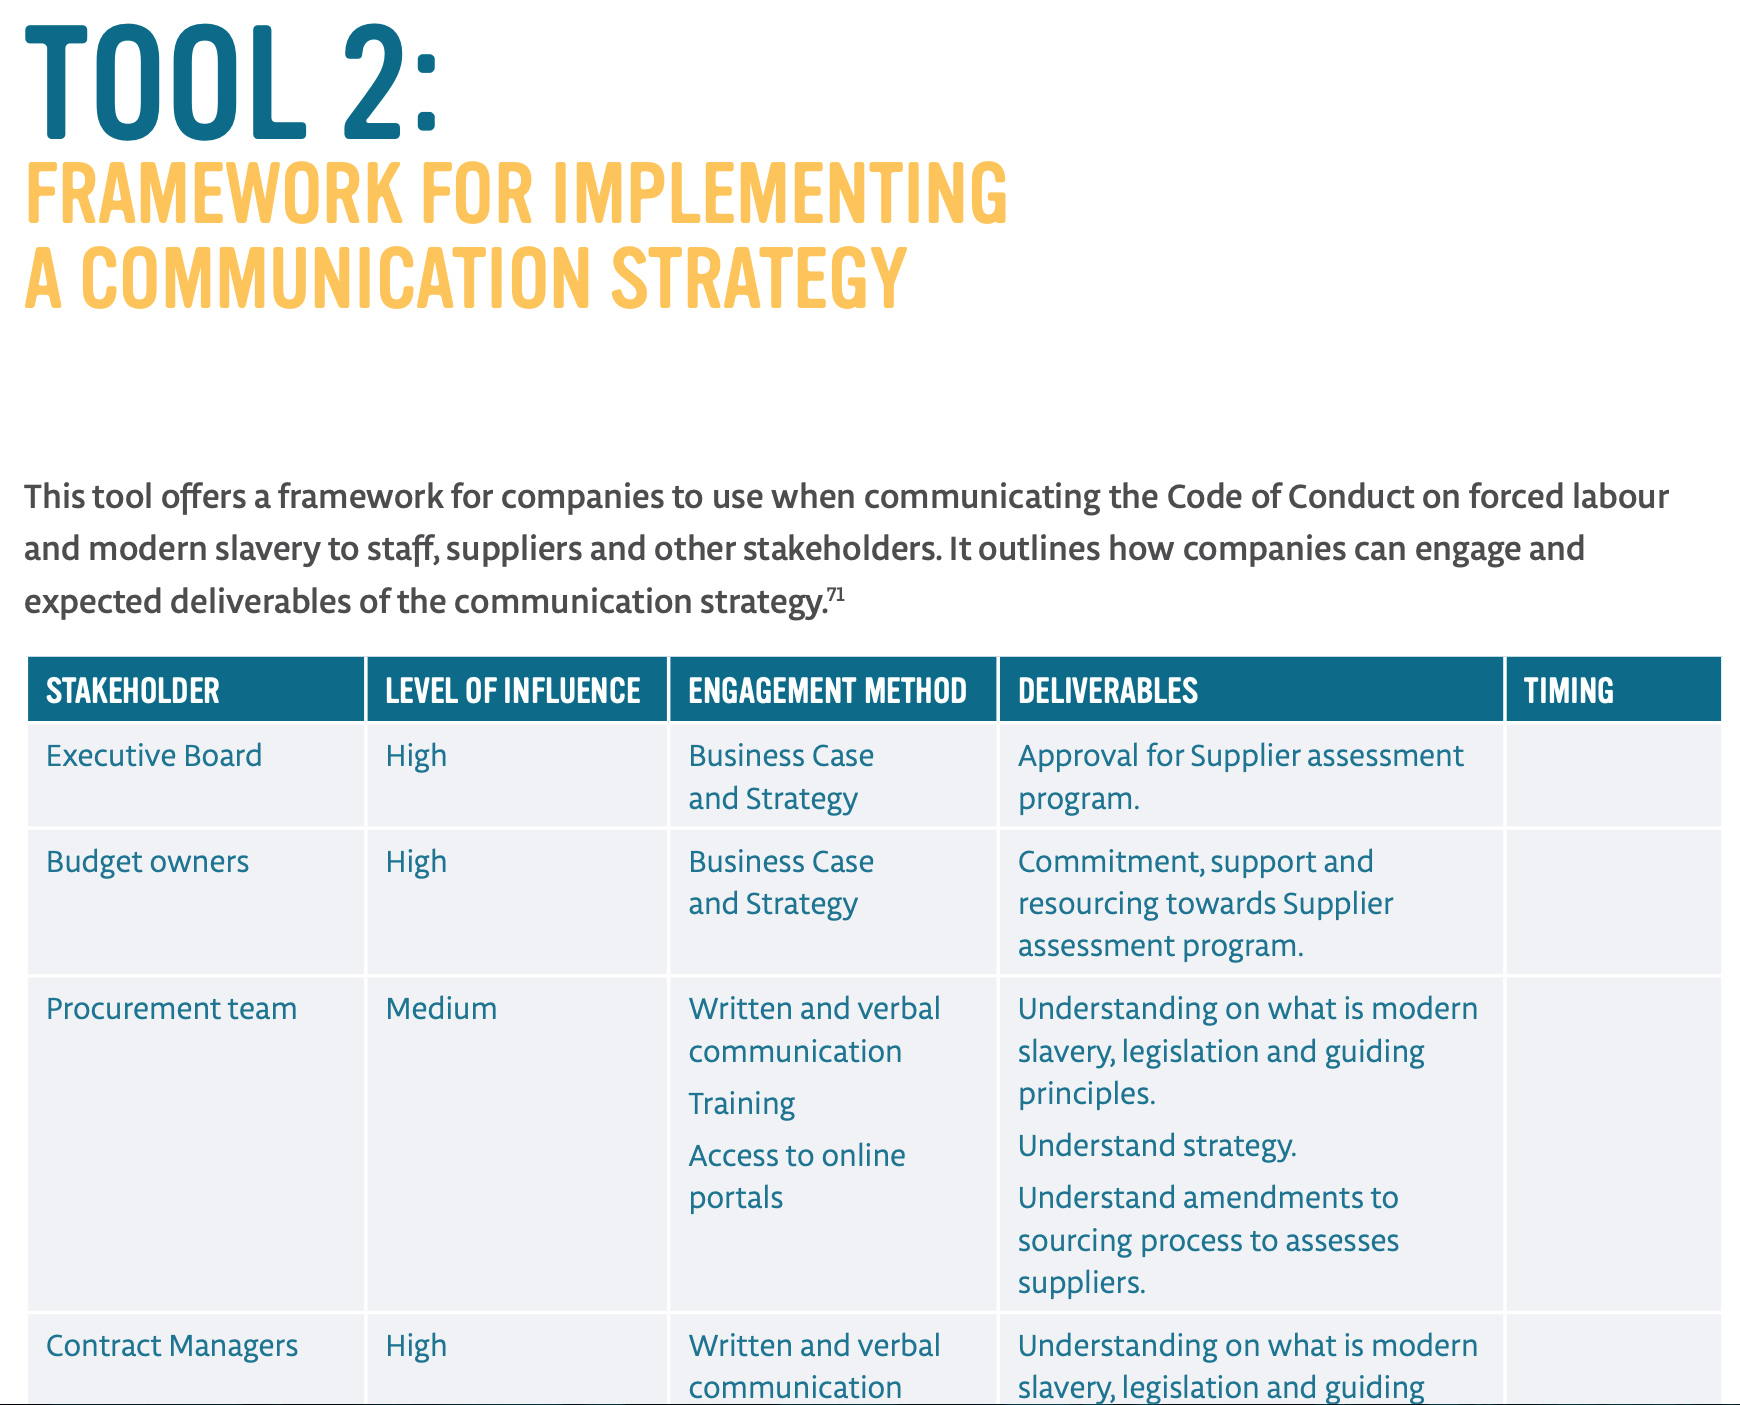 Framework for Implementing a Communication Strategy